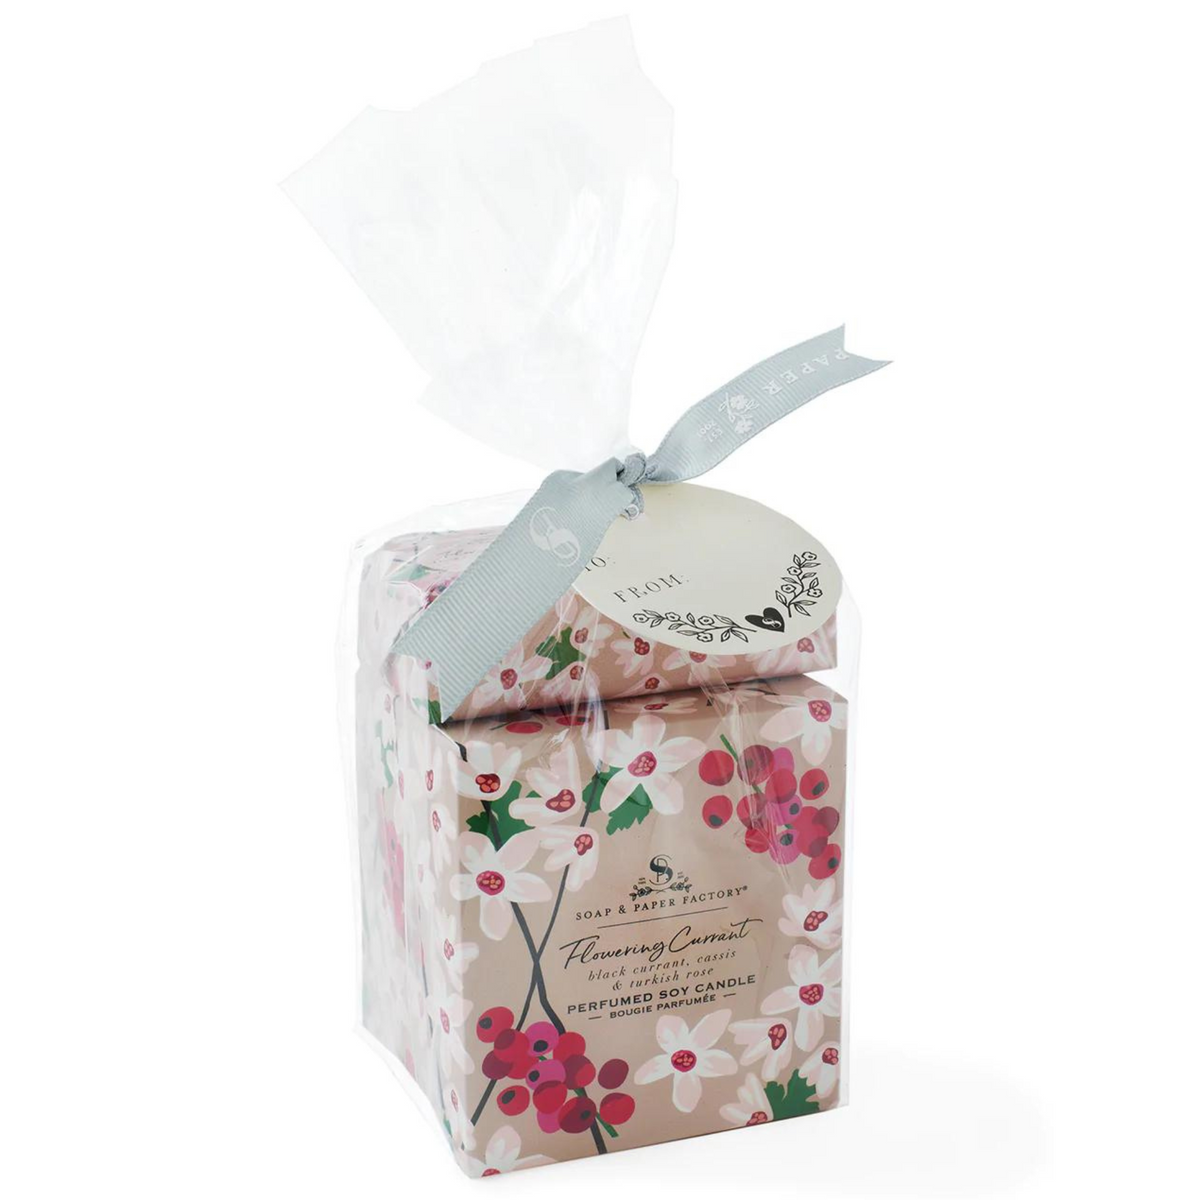 Primary Image of Soap & Paper Factory Flowering Currant Large Soy Candle & Soap Gift Set